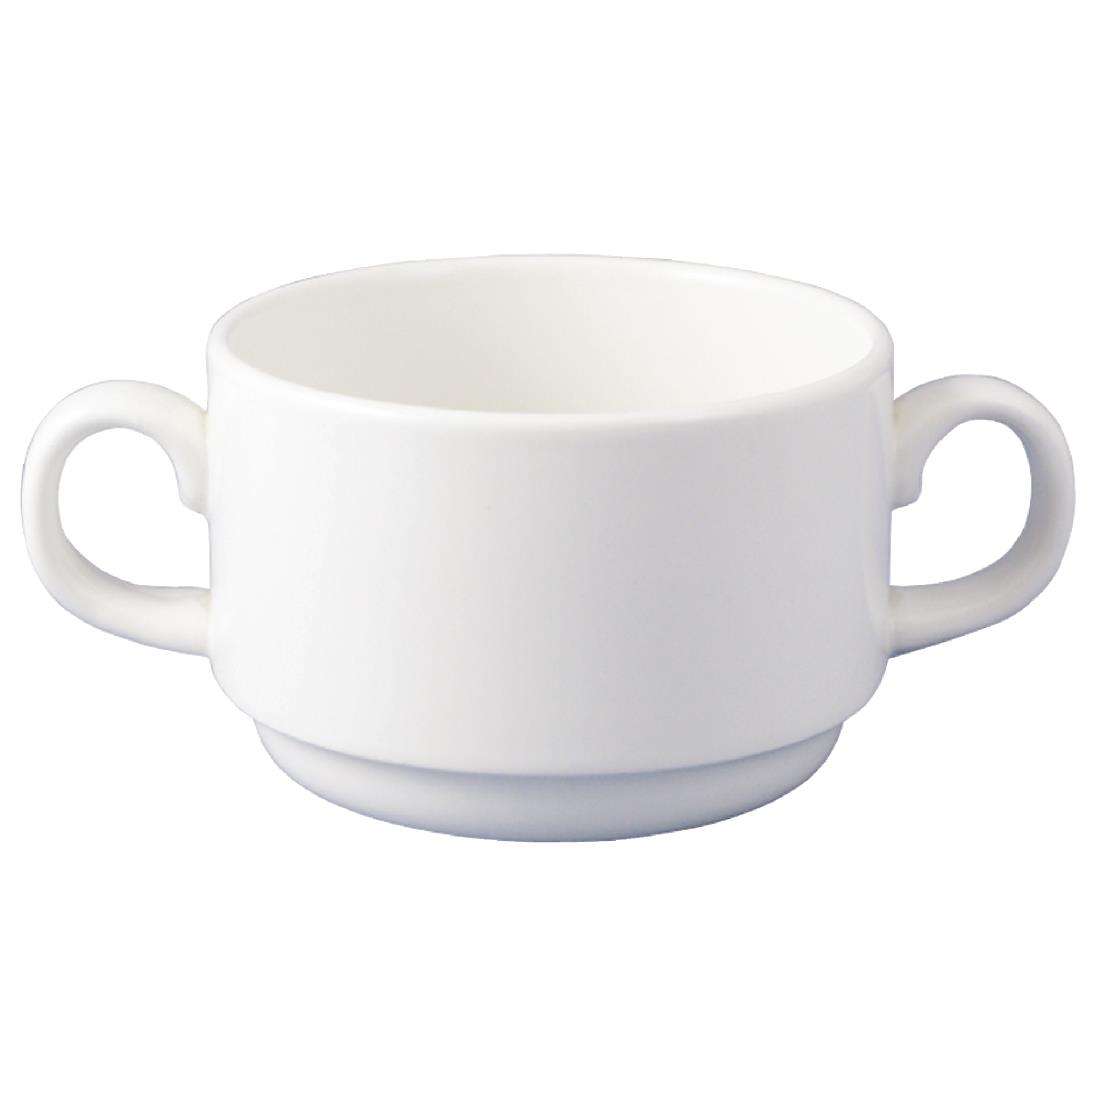 Dudson Classic White Soup Cups 310ml (Pack of 36)